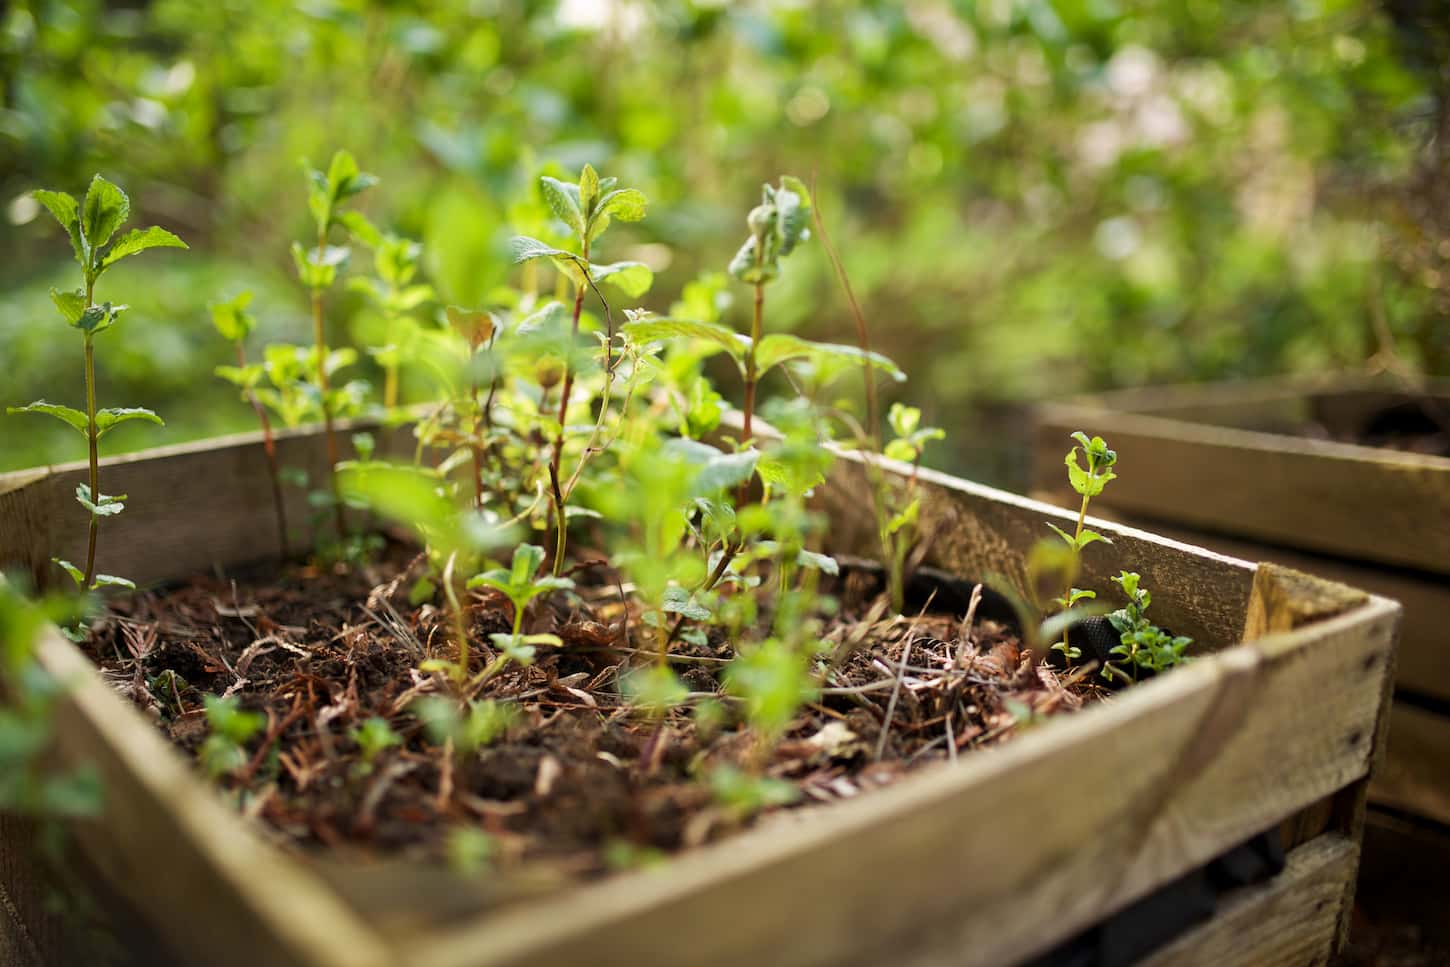 An image of a mint plants growing in raised garden bed.